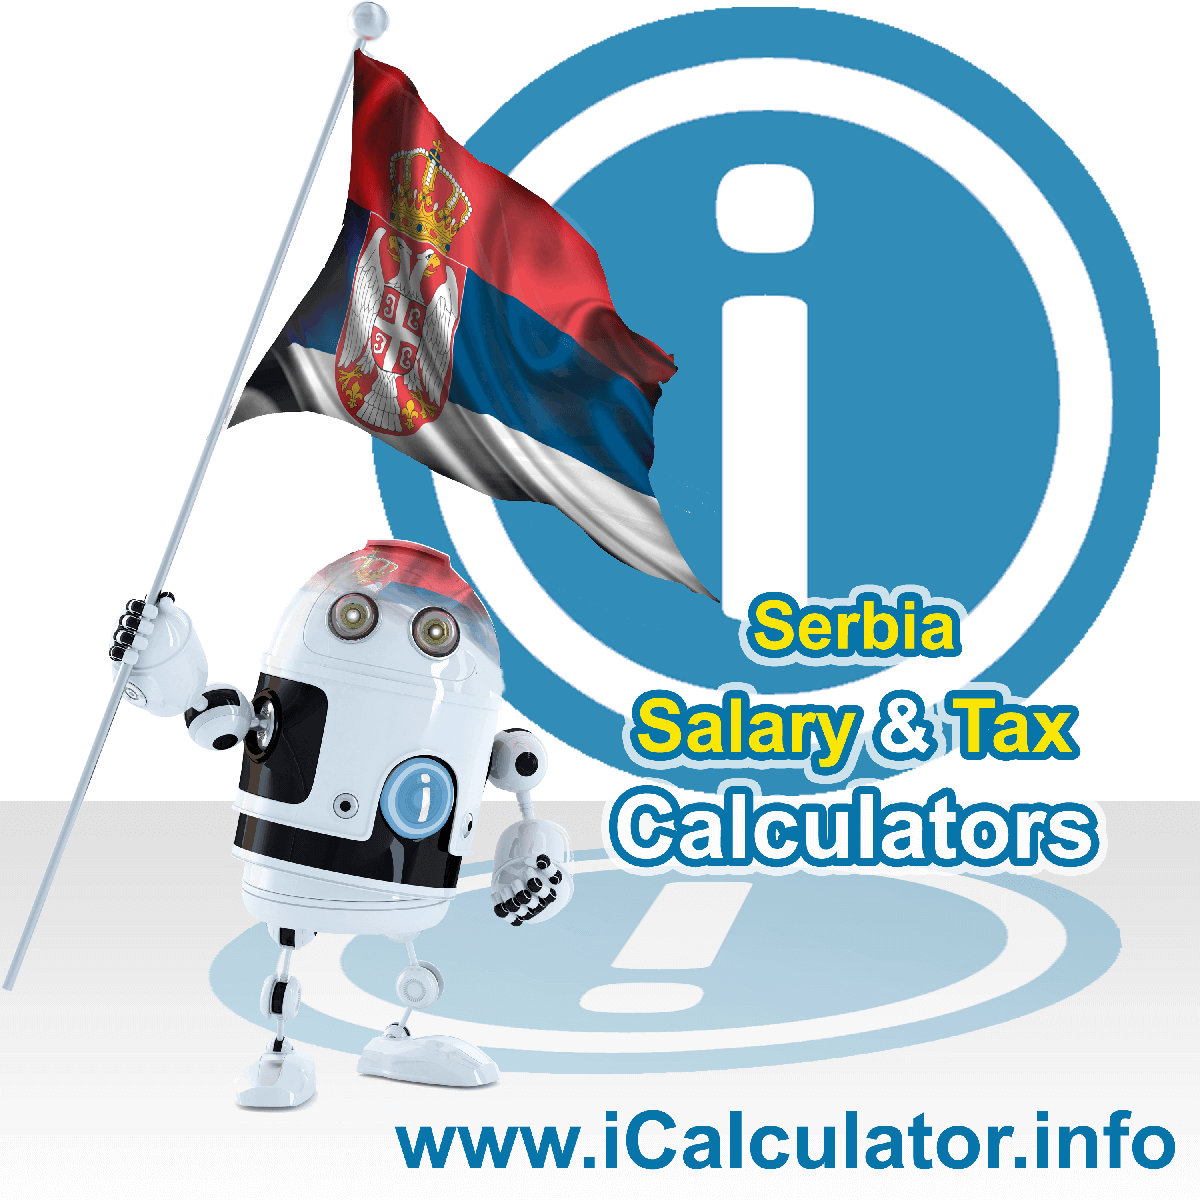 Serbia Wage Calculator. This image shows the Serbia flag and information relating to the tax formula for the Serbia Tax Calculator